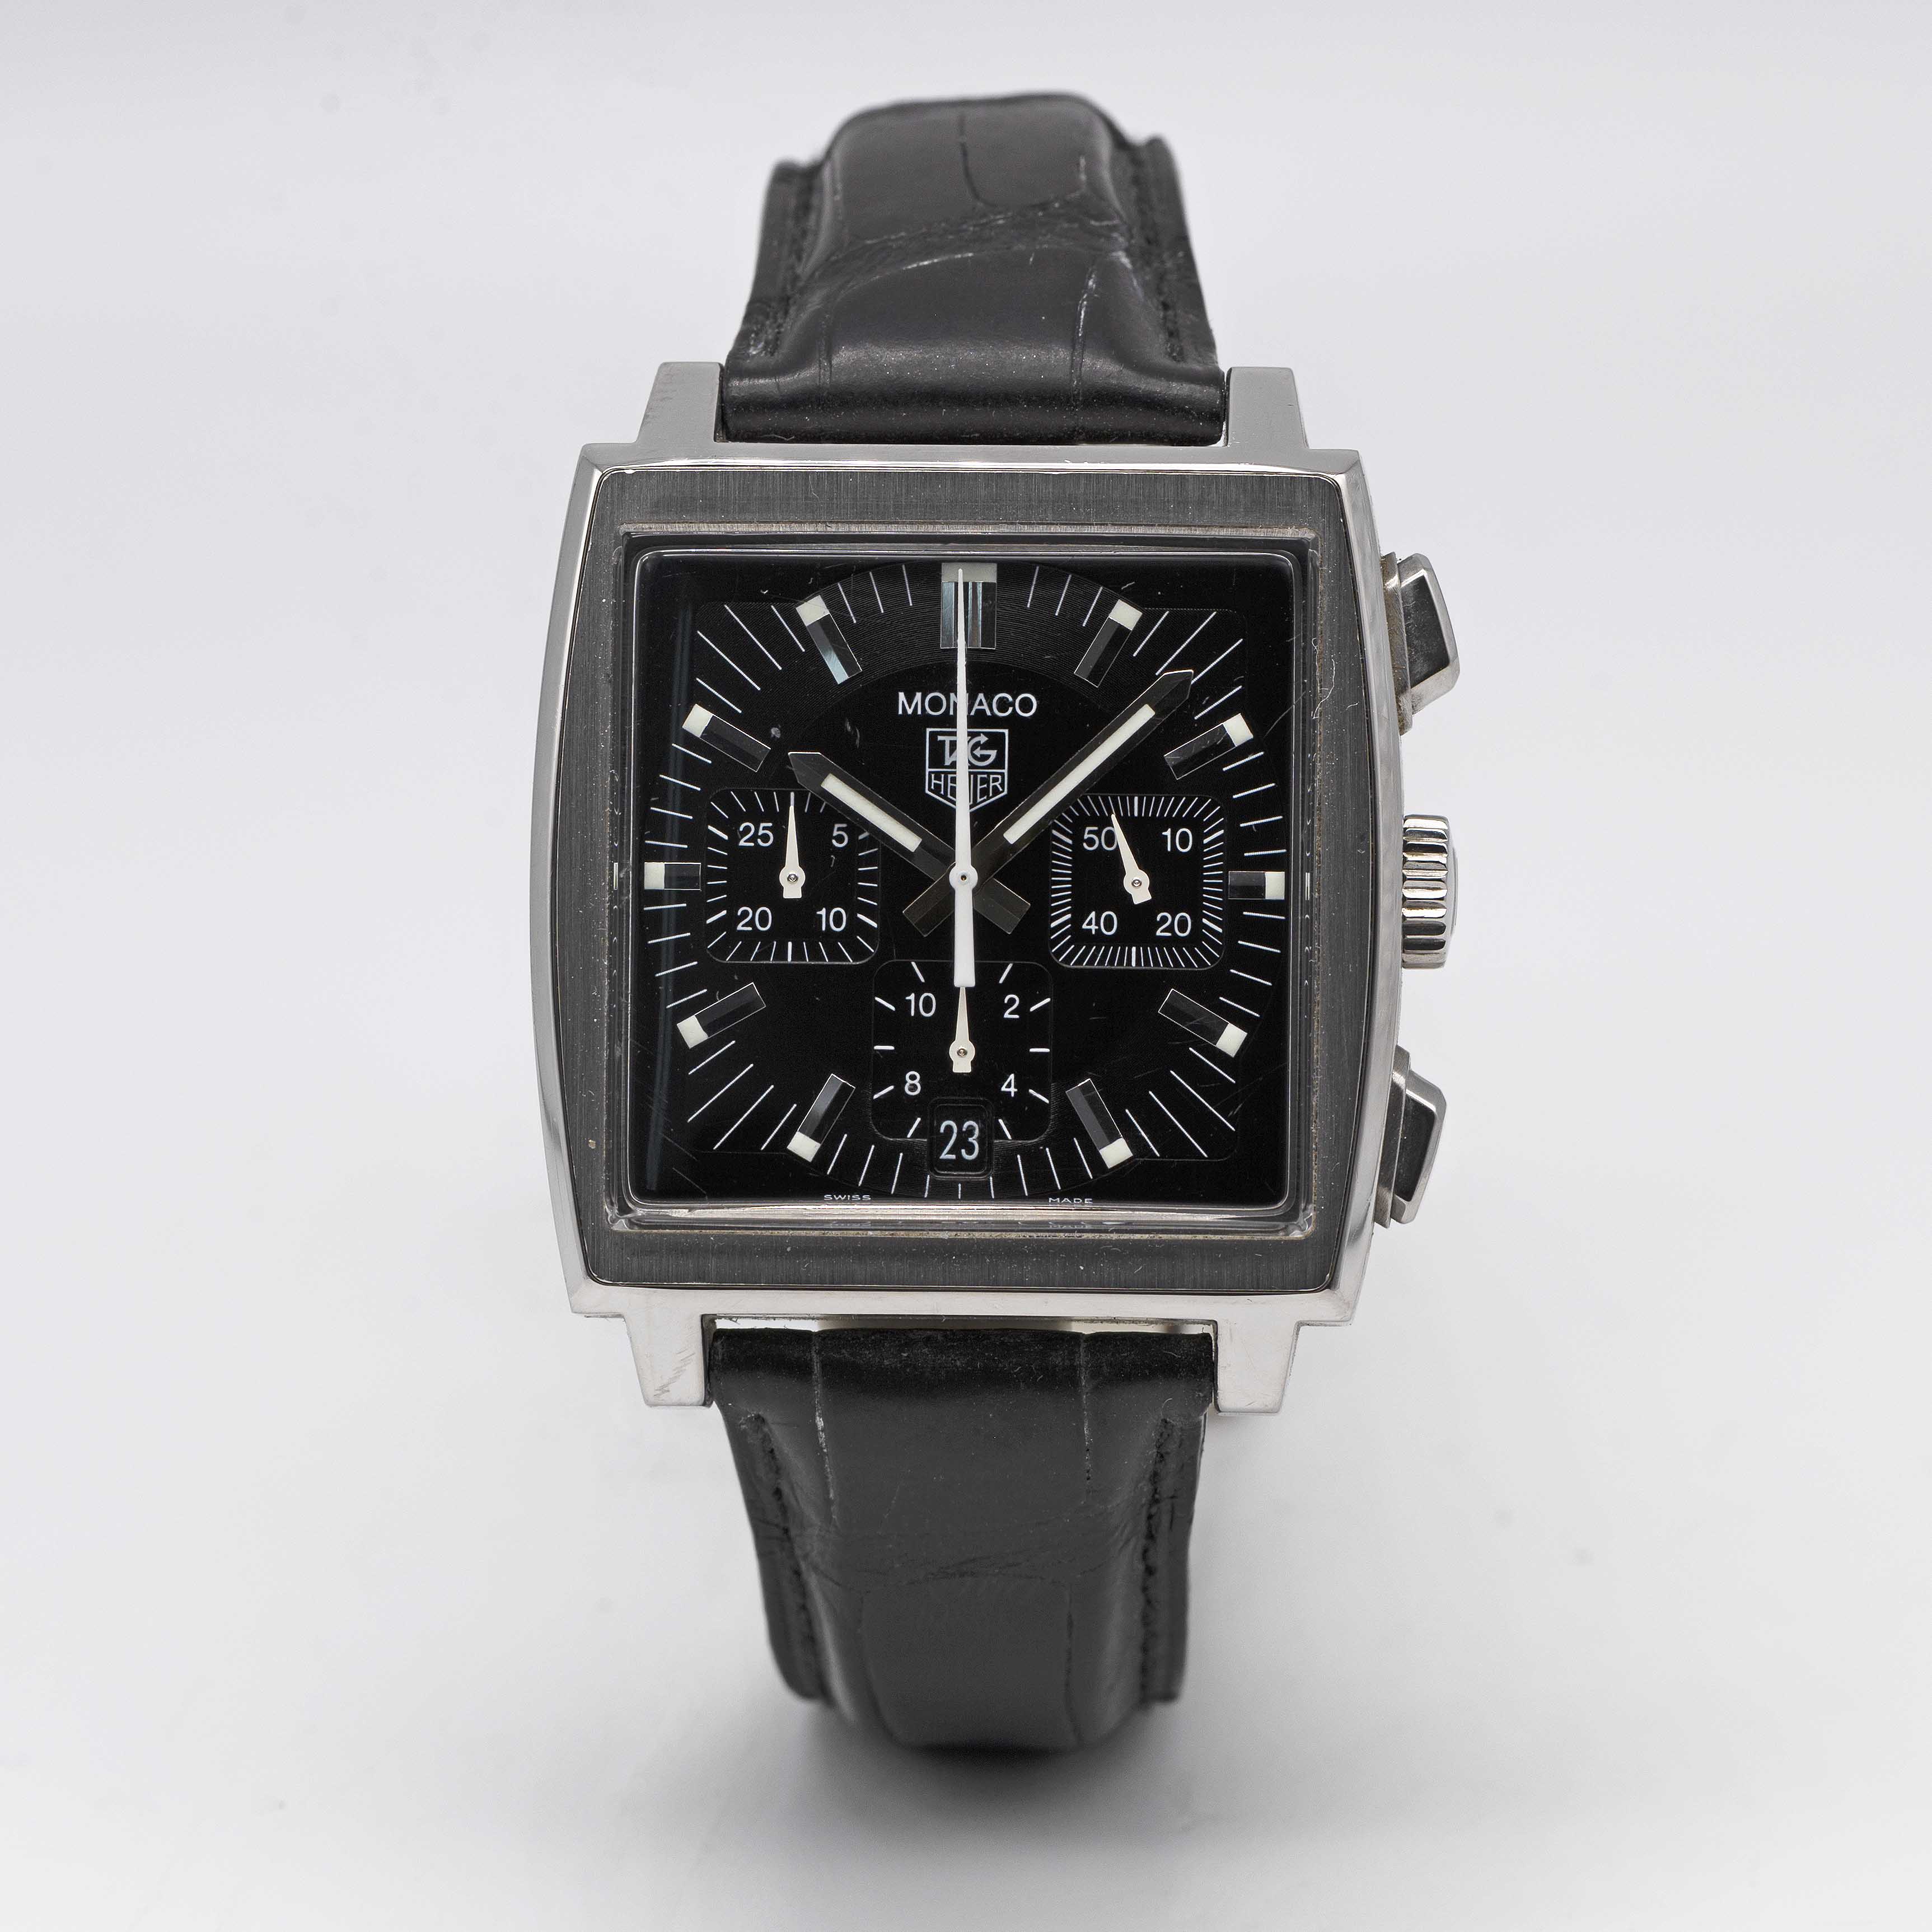 A GENTLEMAN'S STAINLESS STEEL TAG HEUER MONACO AUTOMATIC CHRONOGRAPH WRIST WATCH CIRCA 2005, REF. - Image 2 of 9